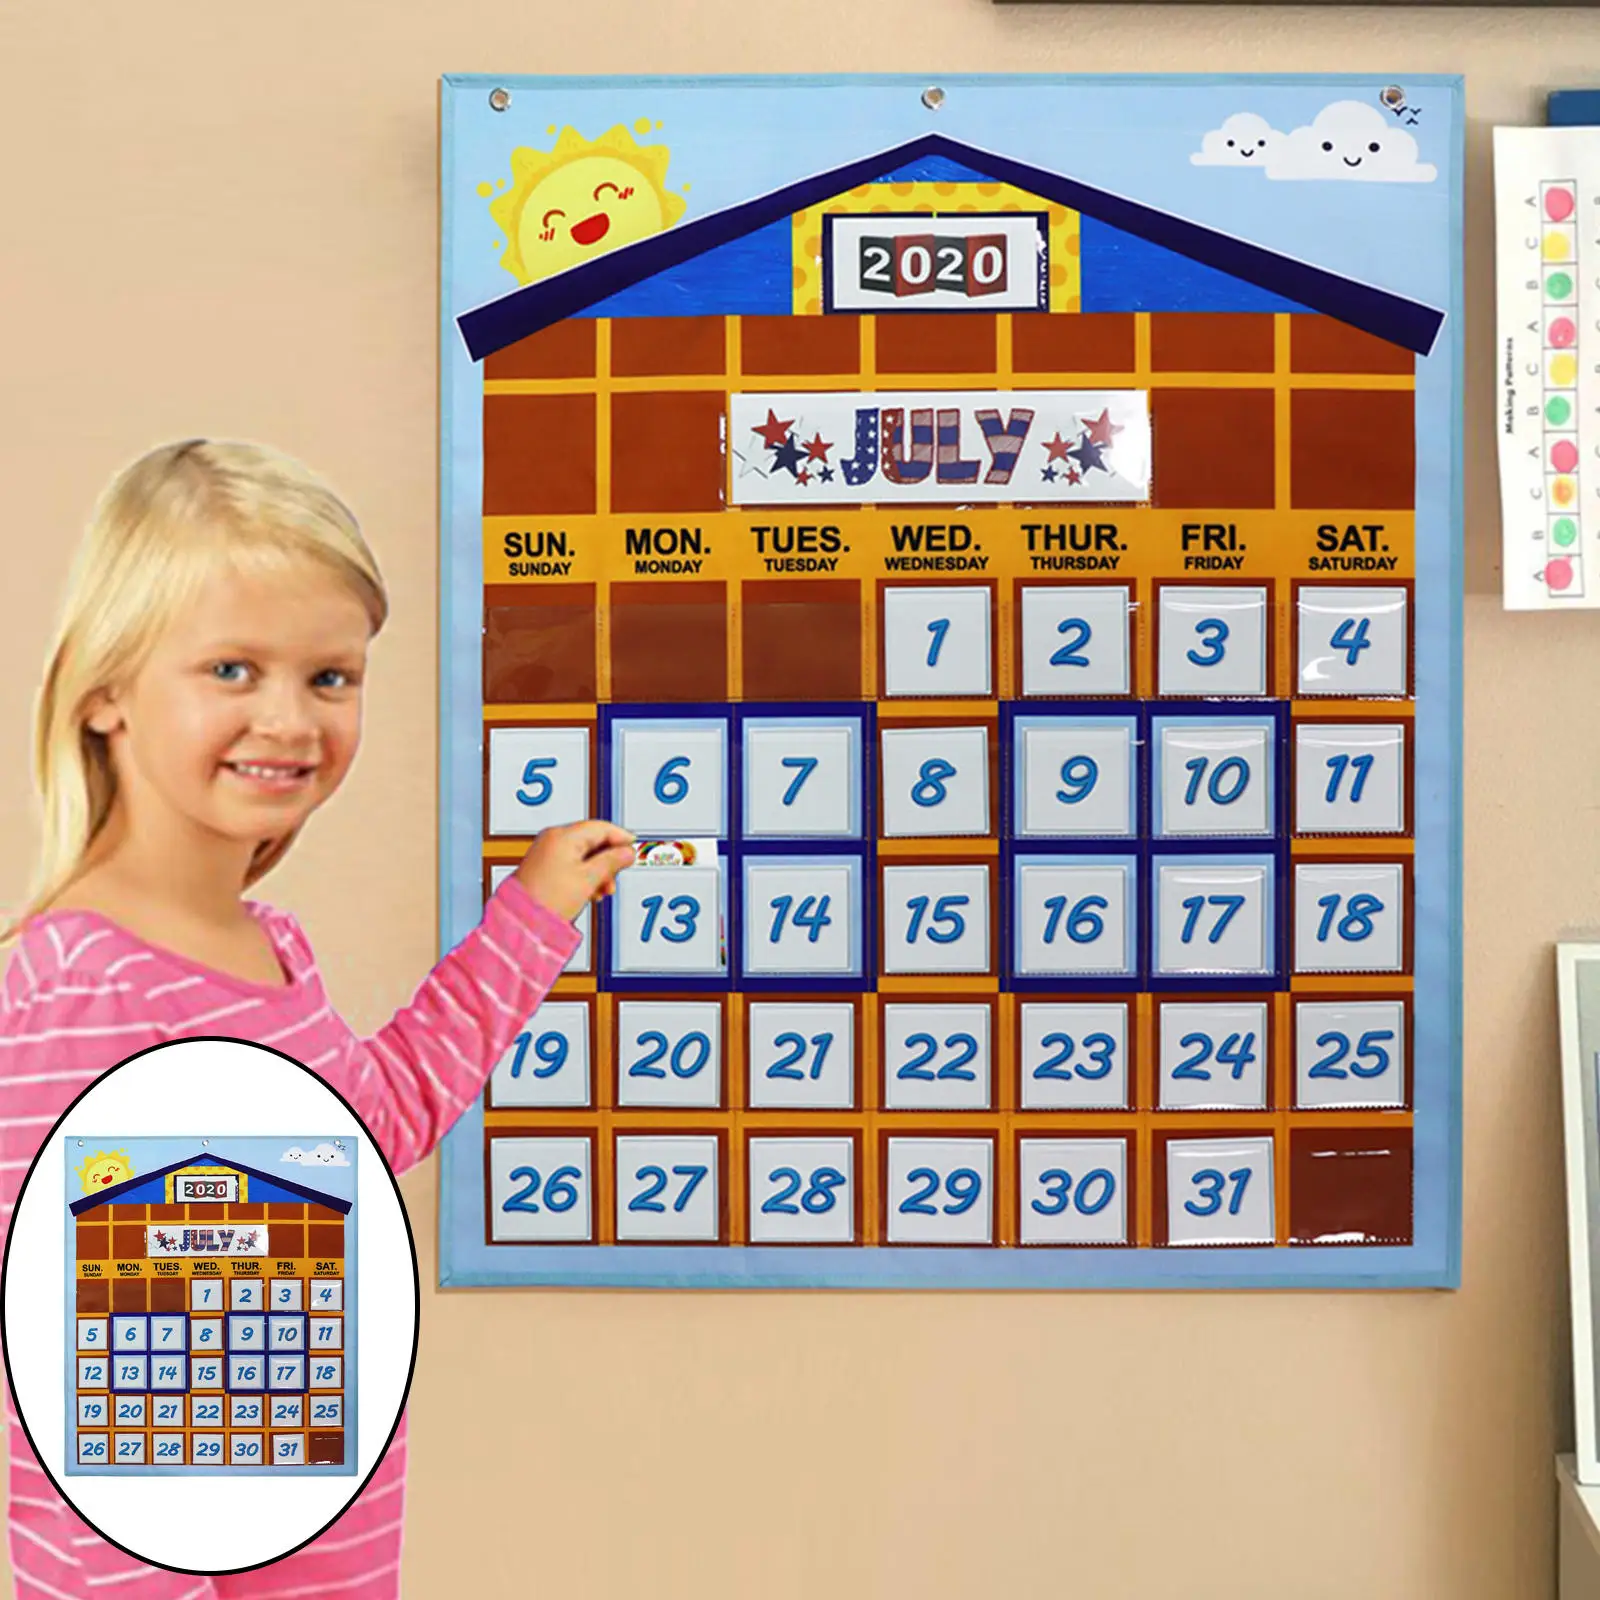 Monthly Wall Calendar Hanging Bag convenient Learning Tool Educational for Teaching Office